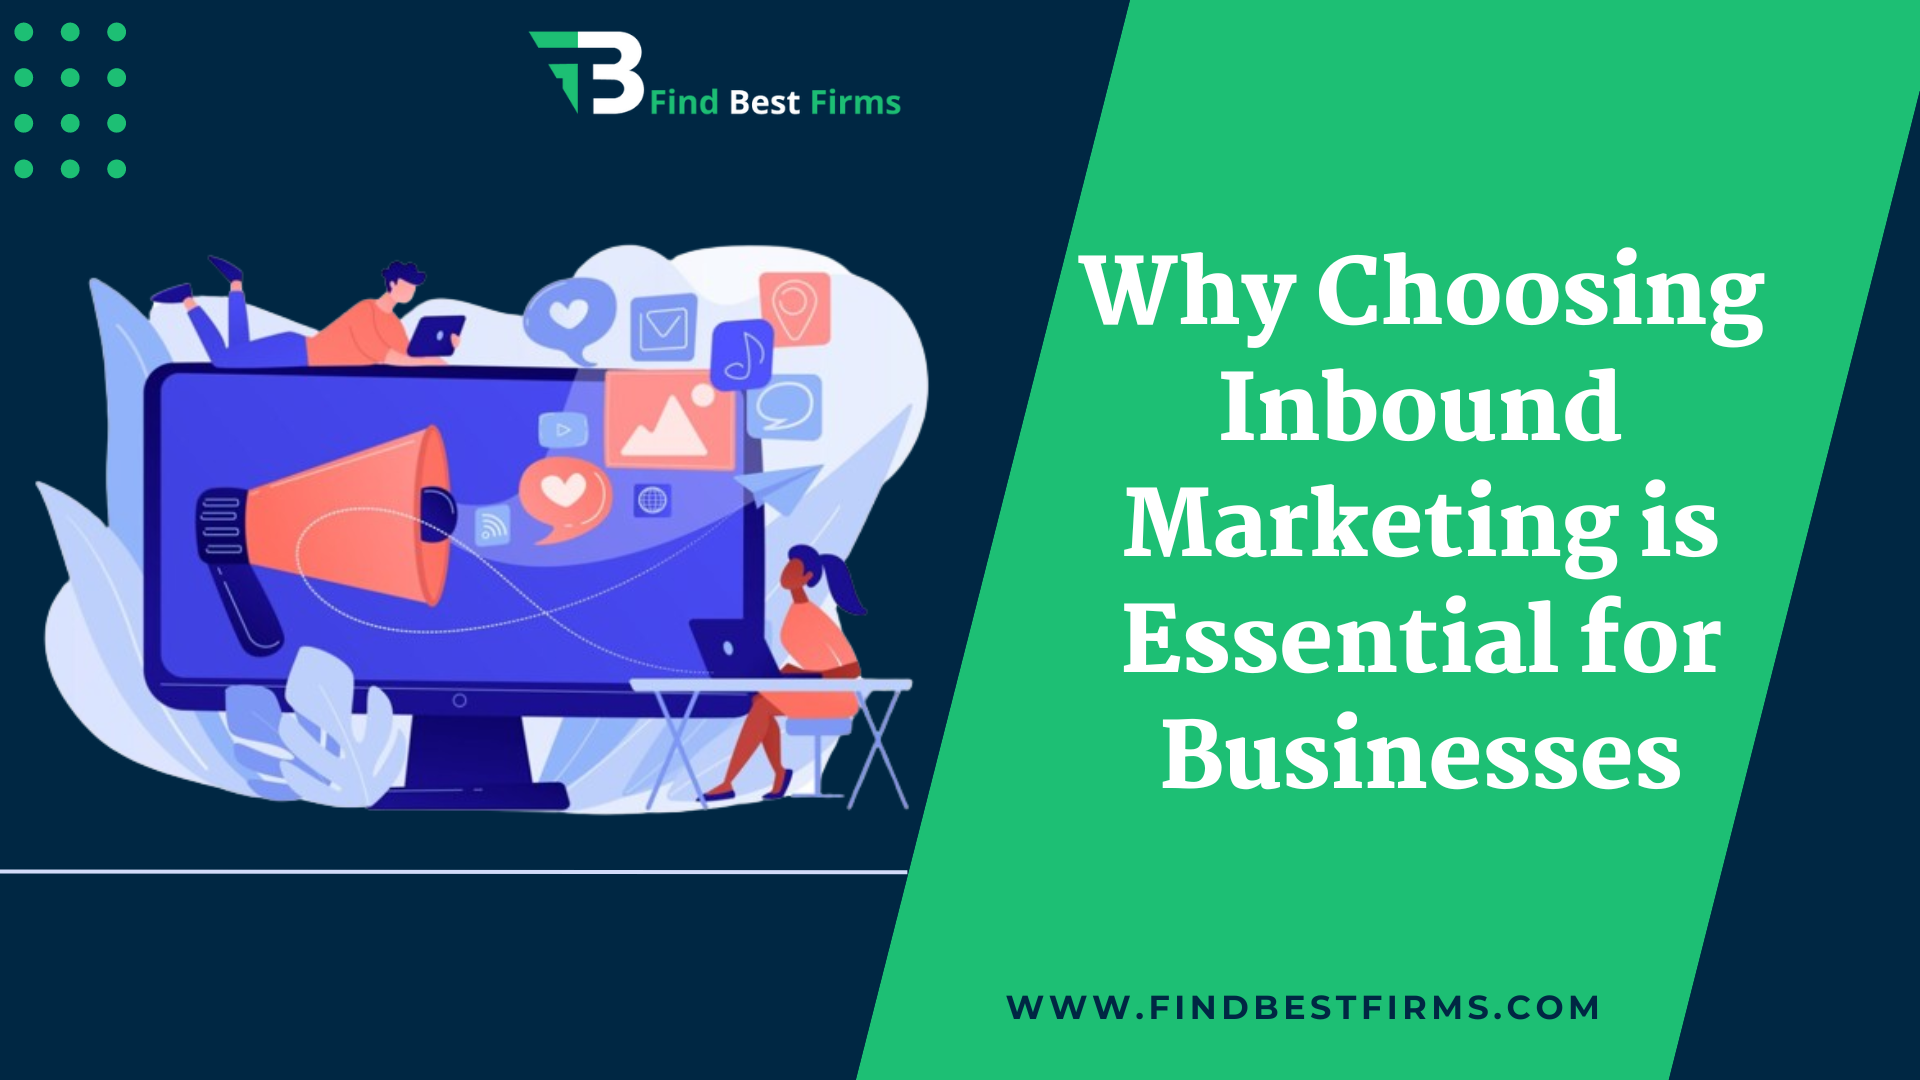 Why Choosing Inbound Marketing is Essential for Businesses